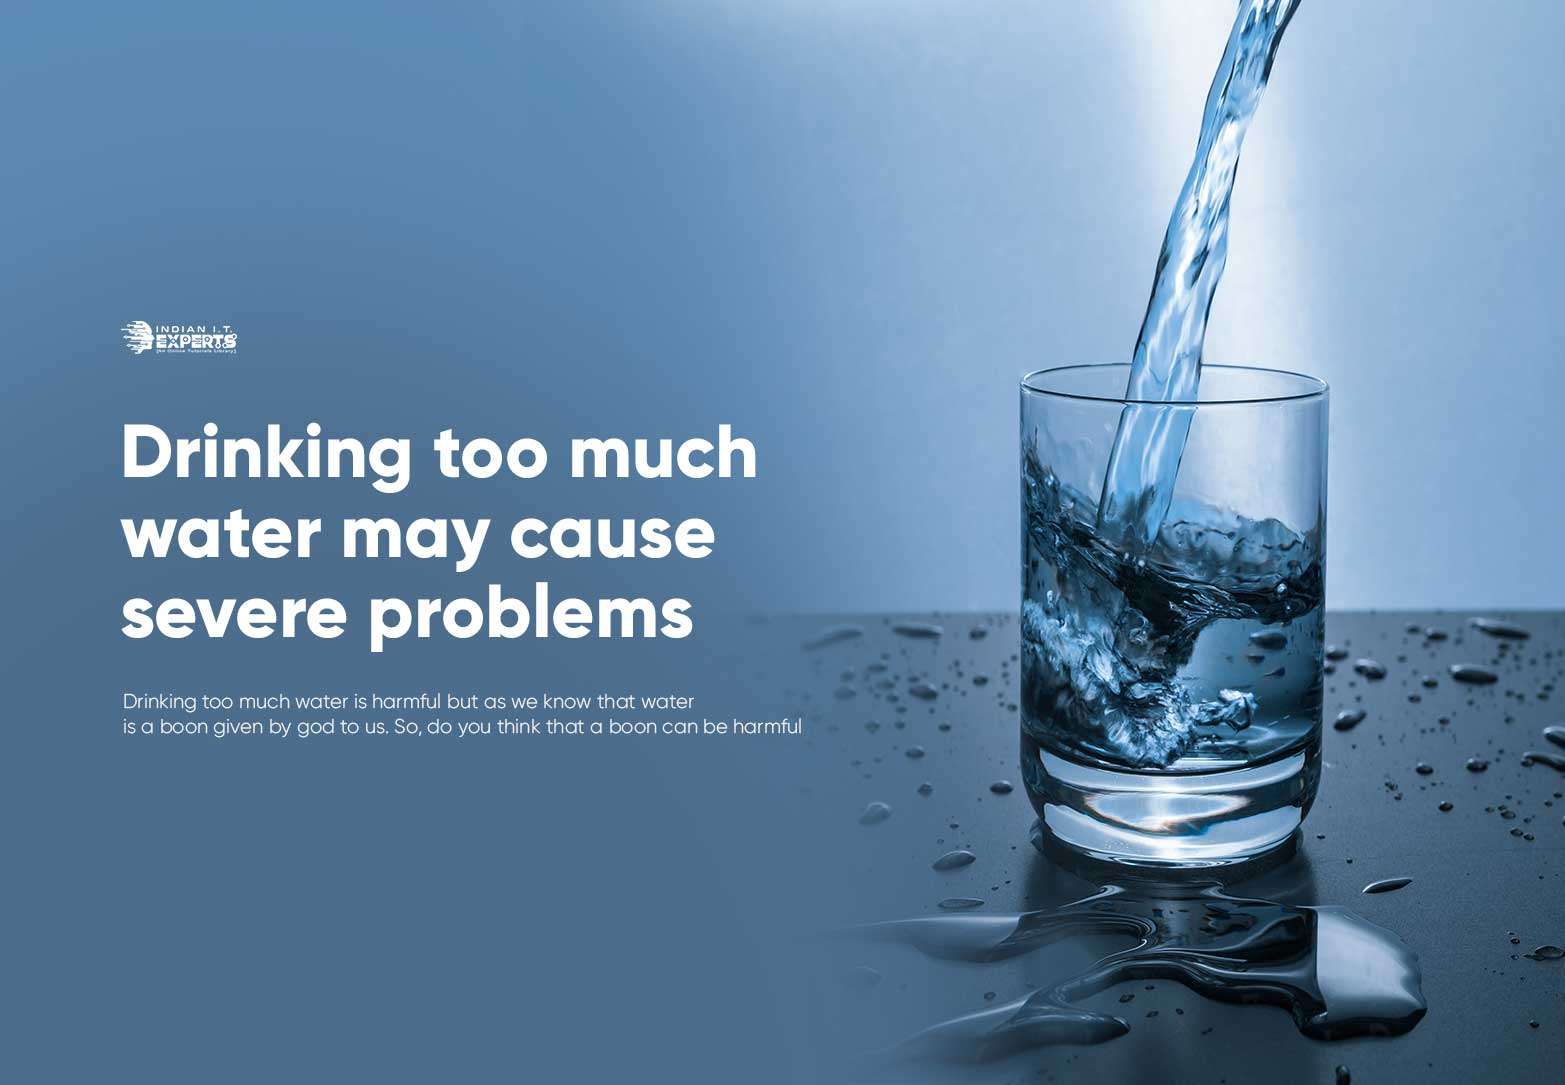 Drinking too much water may cause severe problems